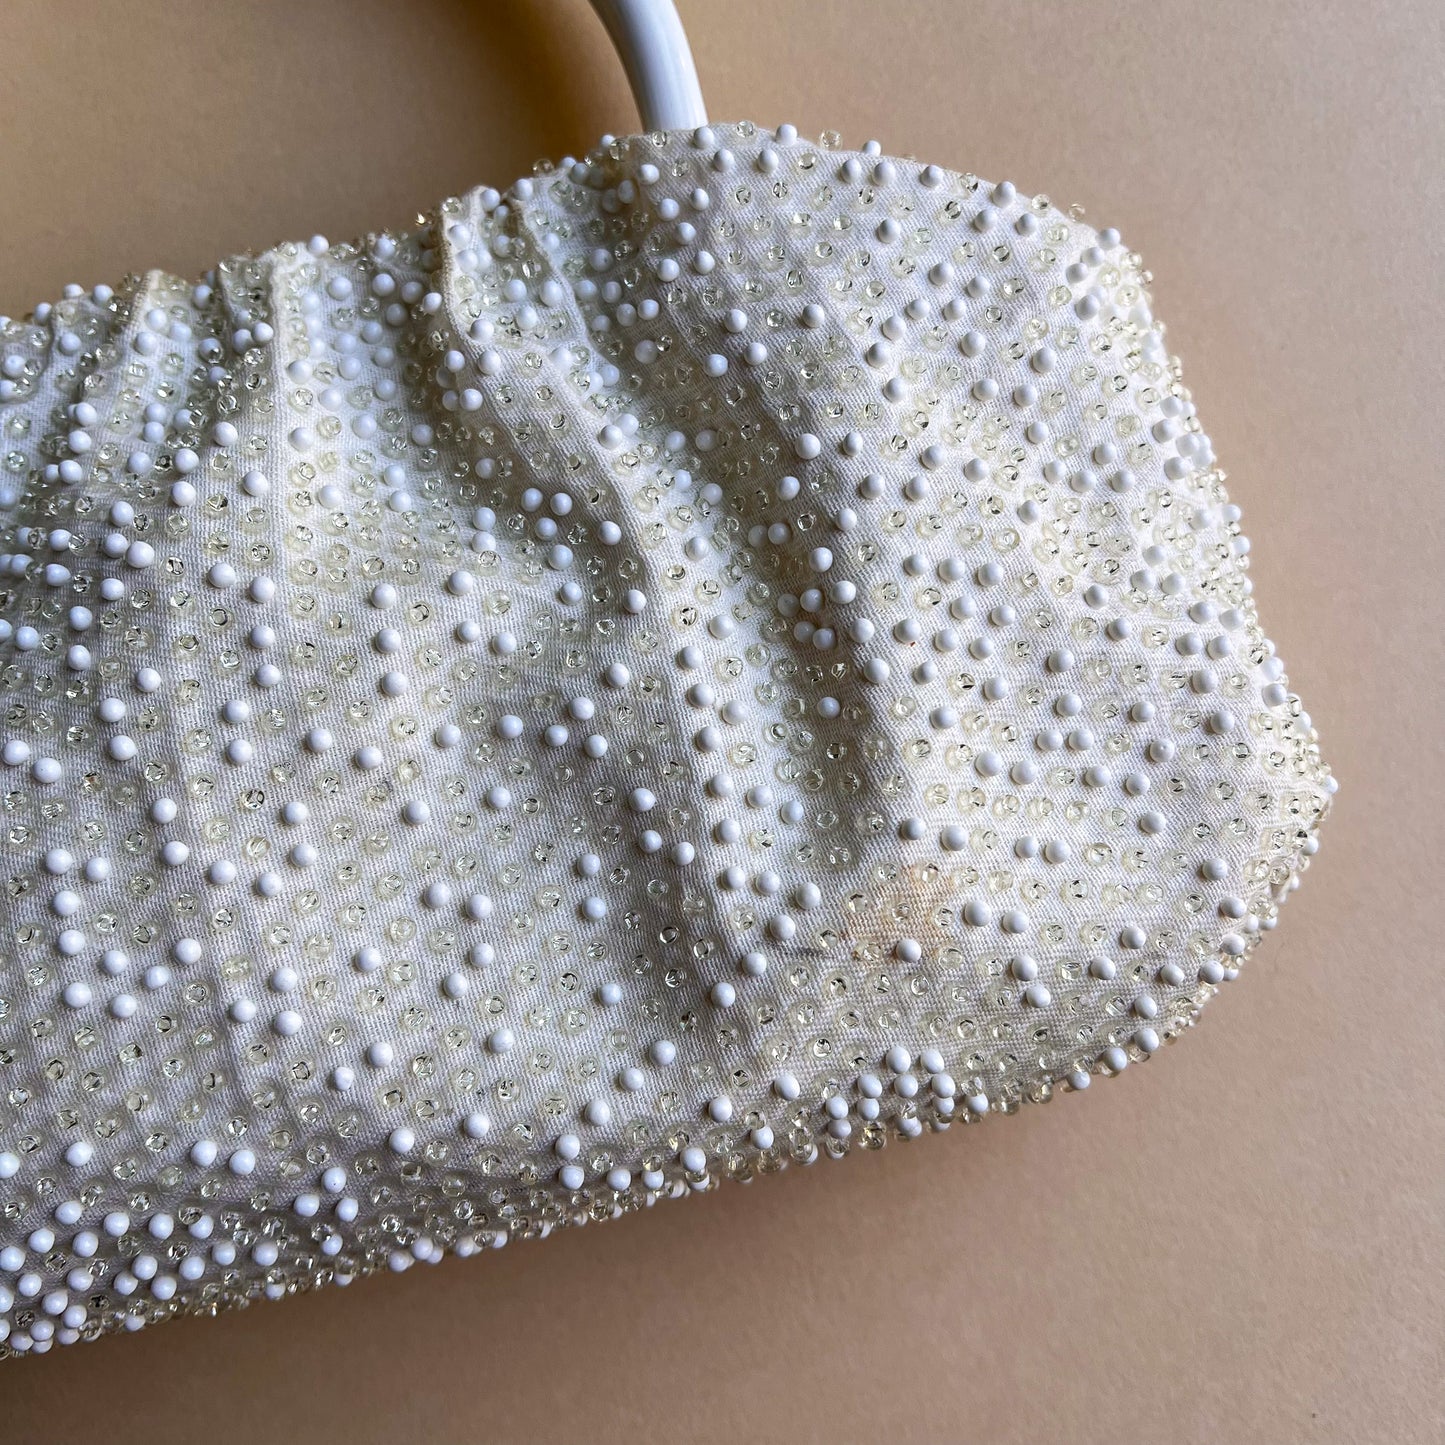 Incredible 1960s Reversible White and Candy-Colored Beaded Handbag